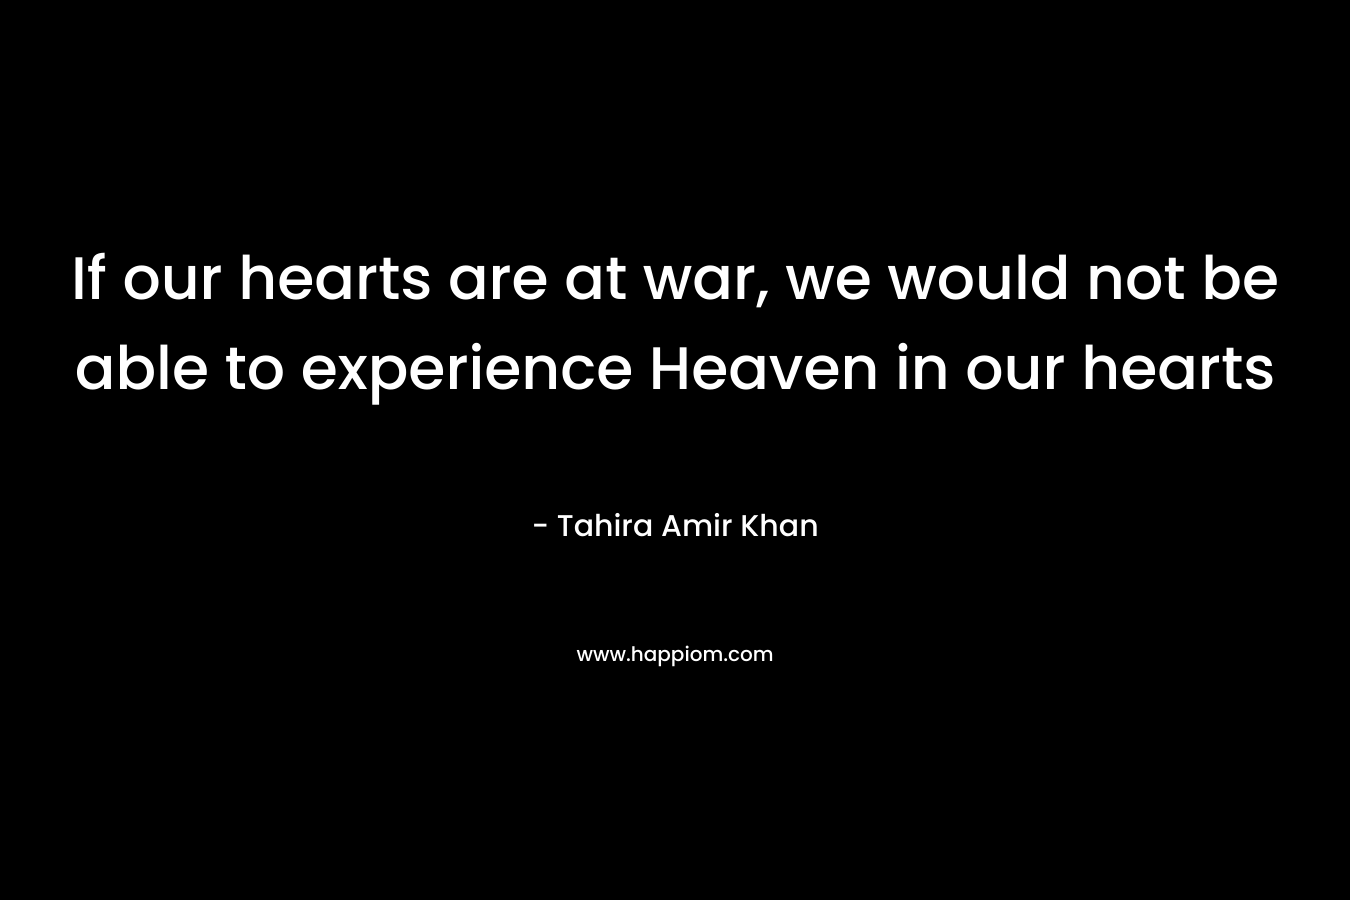 If our hearts are at war, we would not be able to experience Heaven in our hearts